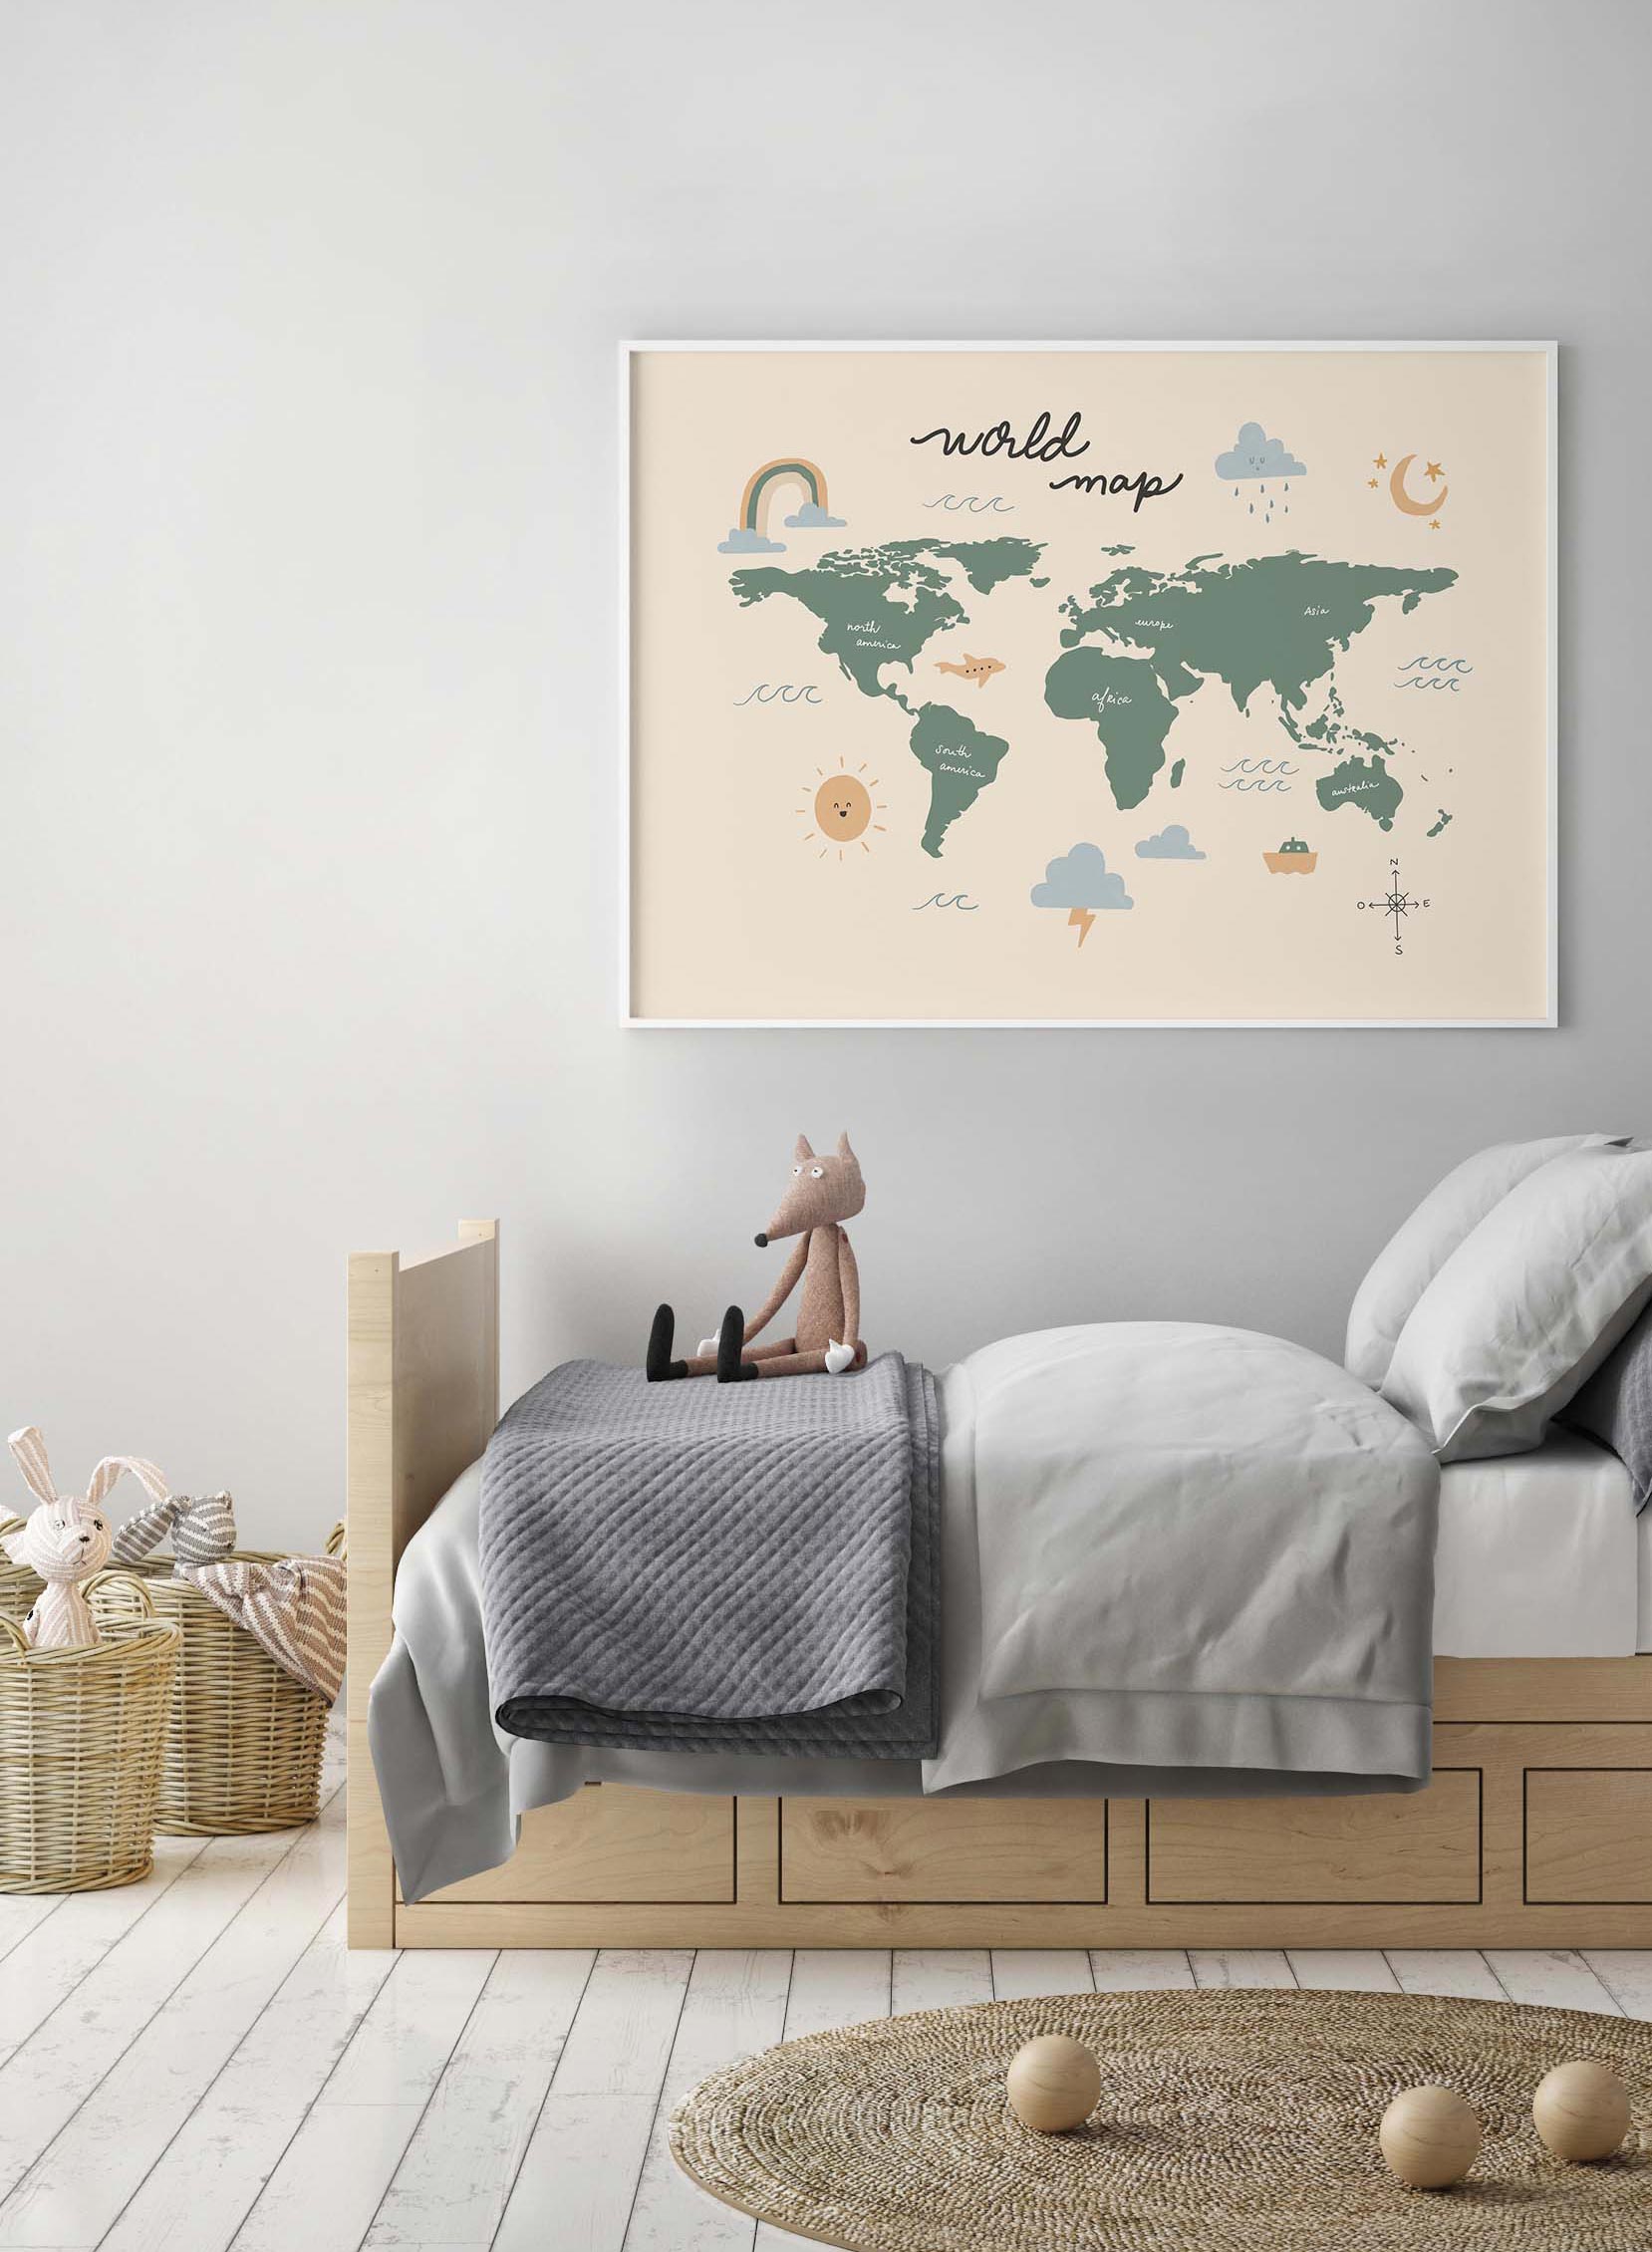 Globe Trotter is a minimalist illustration by Opposite Wall of a simpler world map depicting the five continents in French accompanied by different weather patterns.